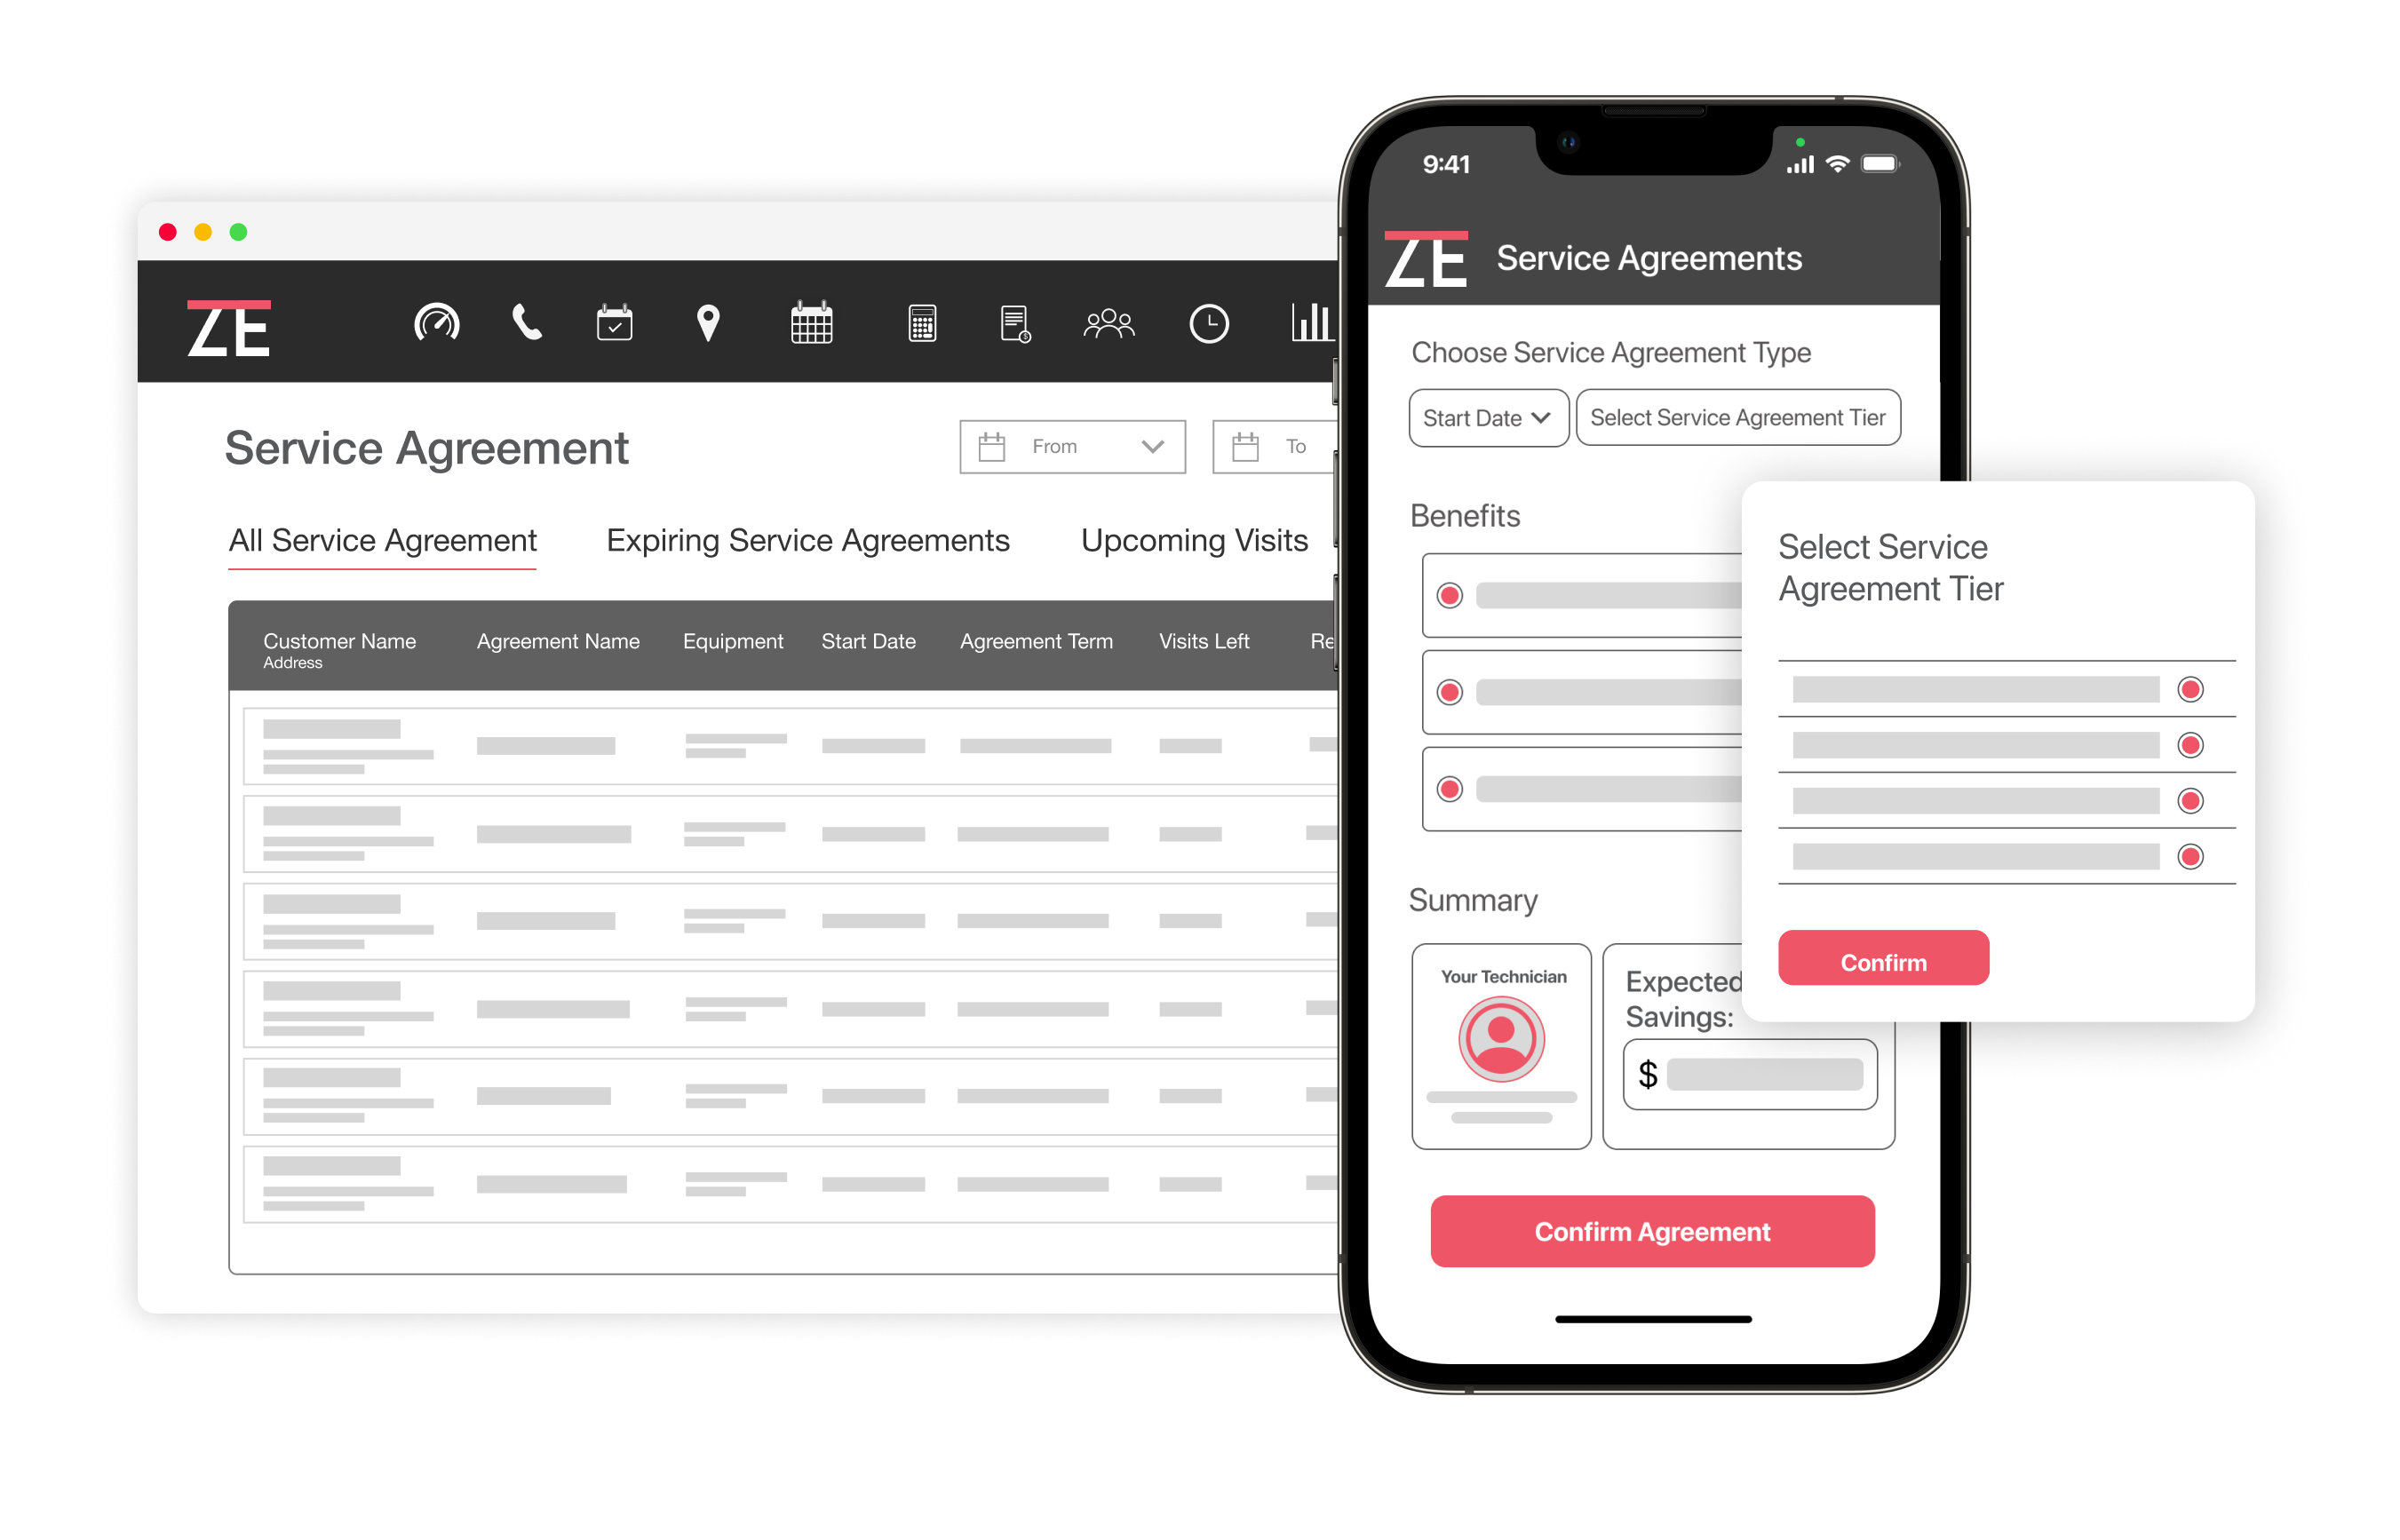 Maintenance Agreements
ZenElectrical maintenance agreement software allows you to easily schedule and manage all recurring jobs, ensuring a smooth customer experience. Renewing agreements is made simple with our software.
